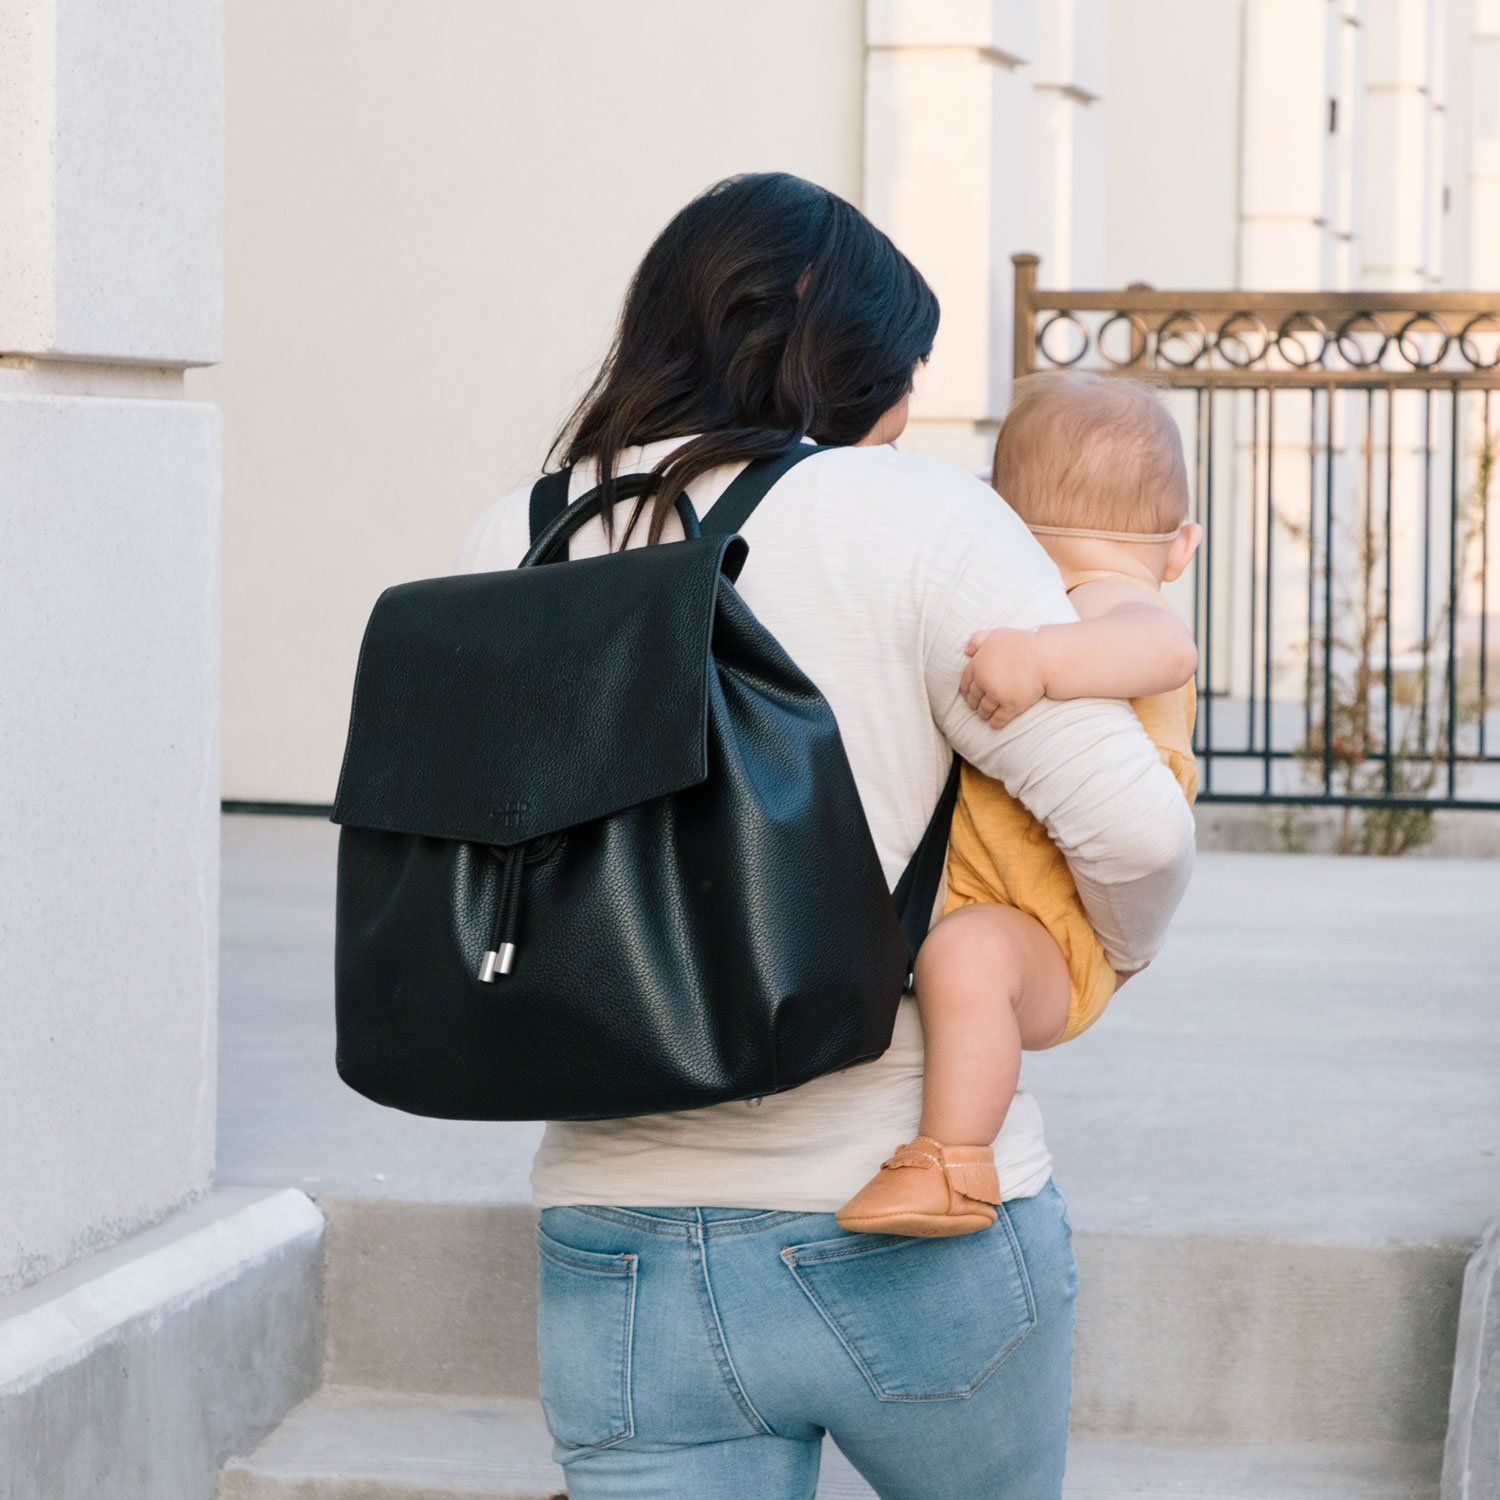 Freshly Picked Diaper Backpack Review — Live Love Blank